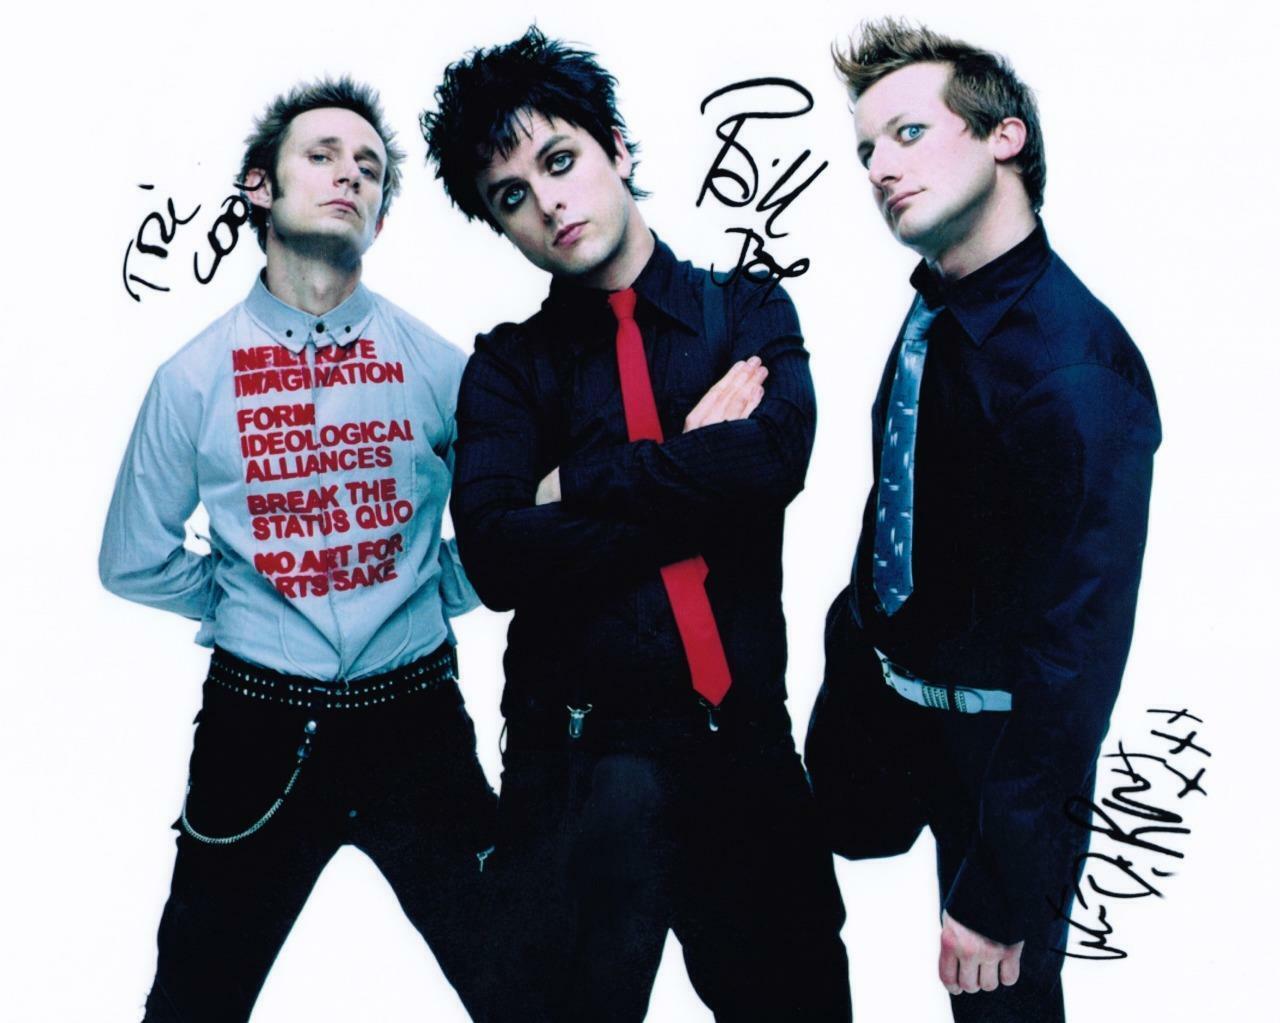 GREENDAY X3 SIGNED AUTOGRAPHED 10 X 8